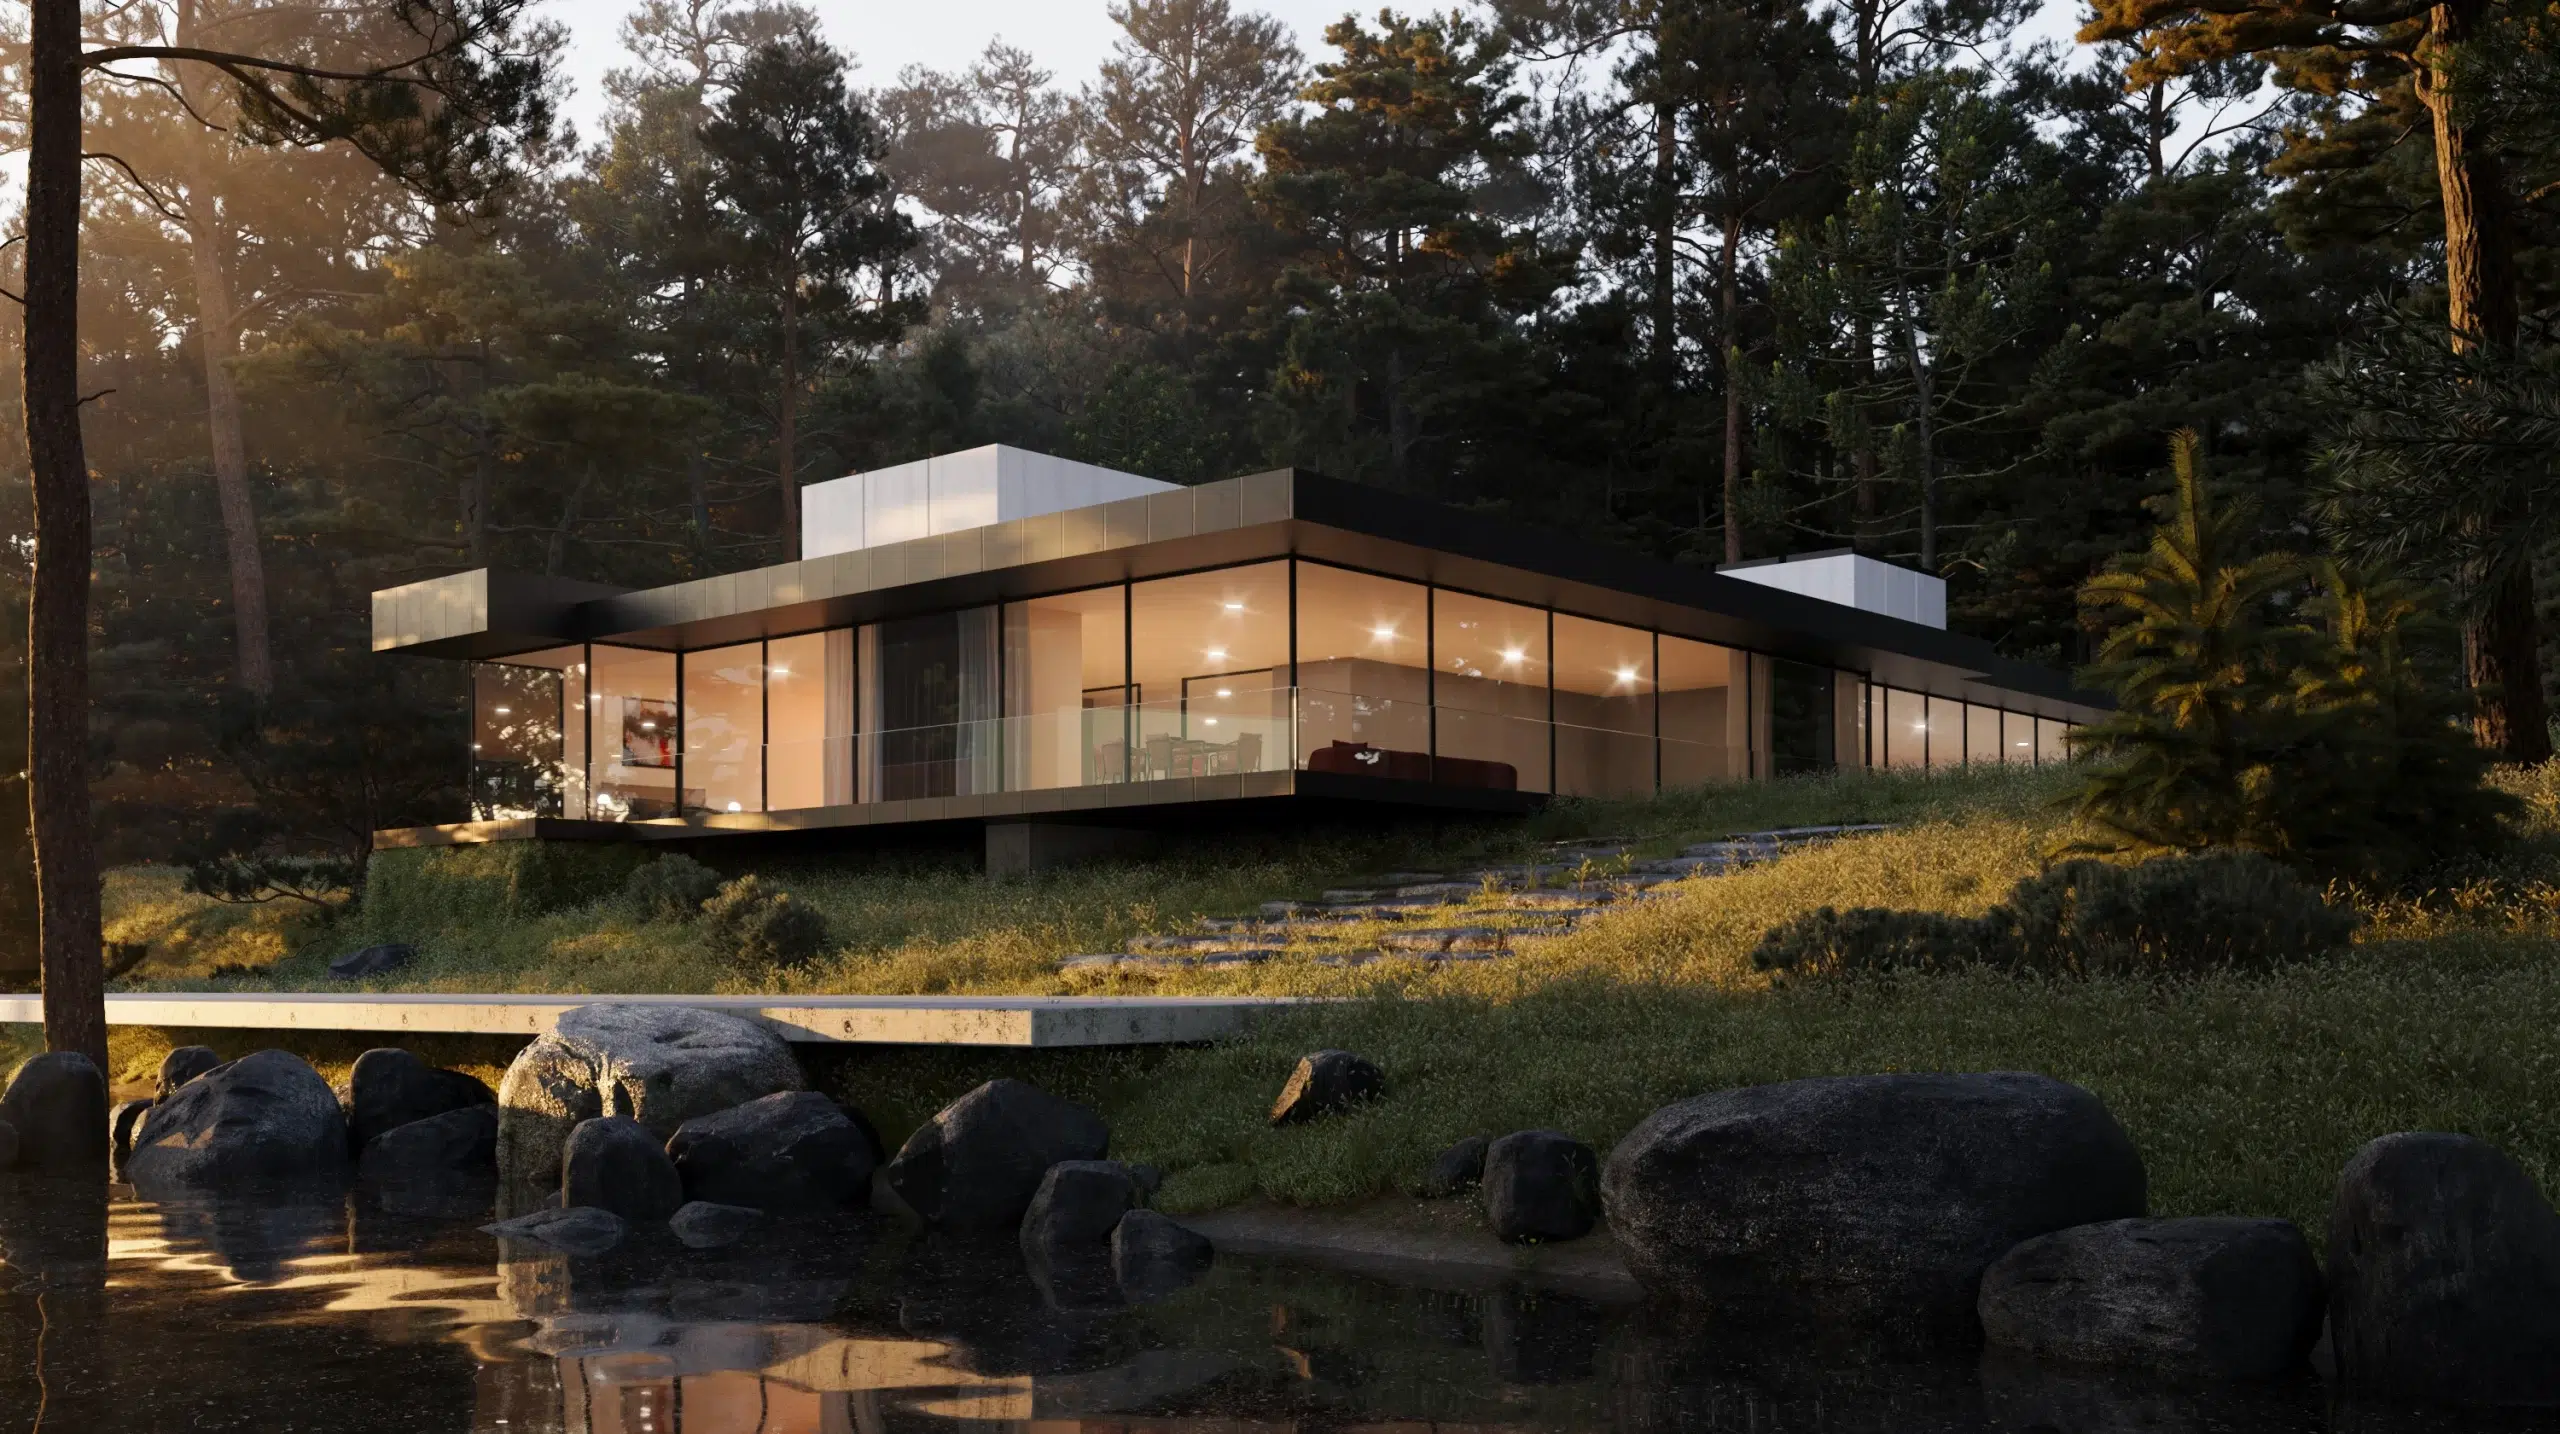 A modern glass house with warm interior lighting stands by a tranquil lakeside